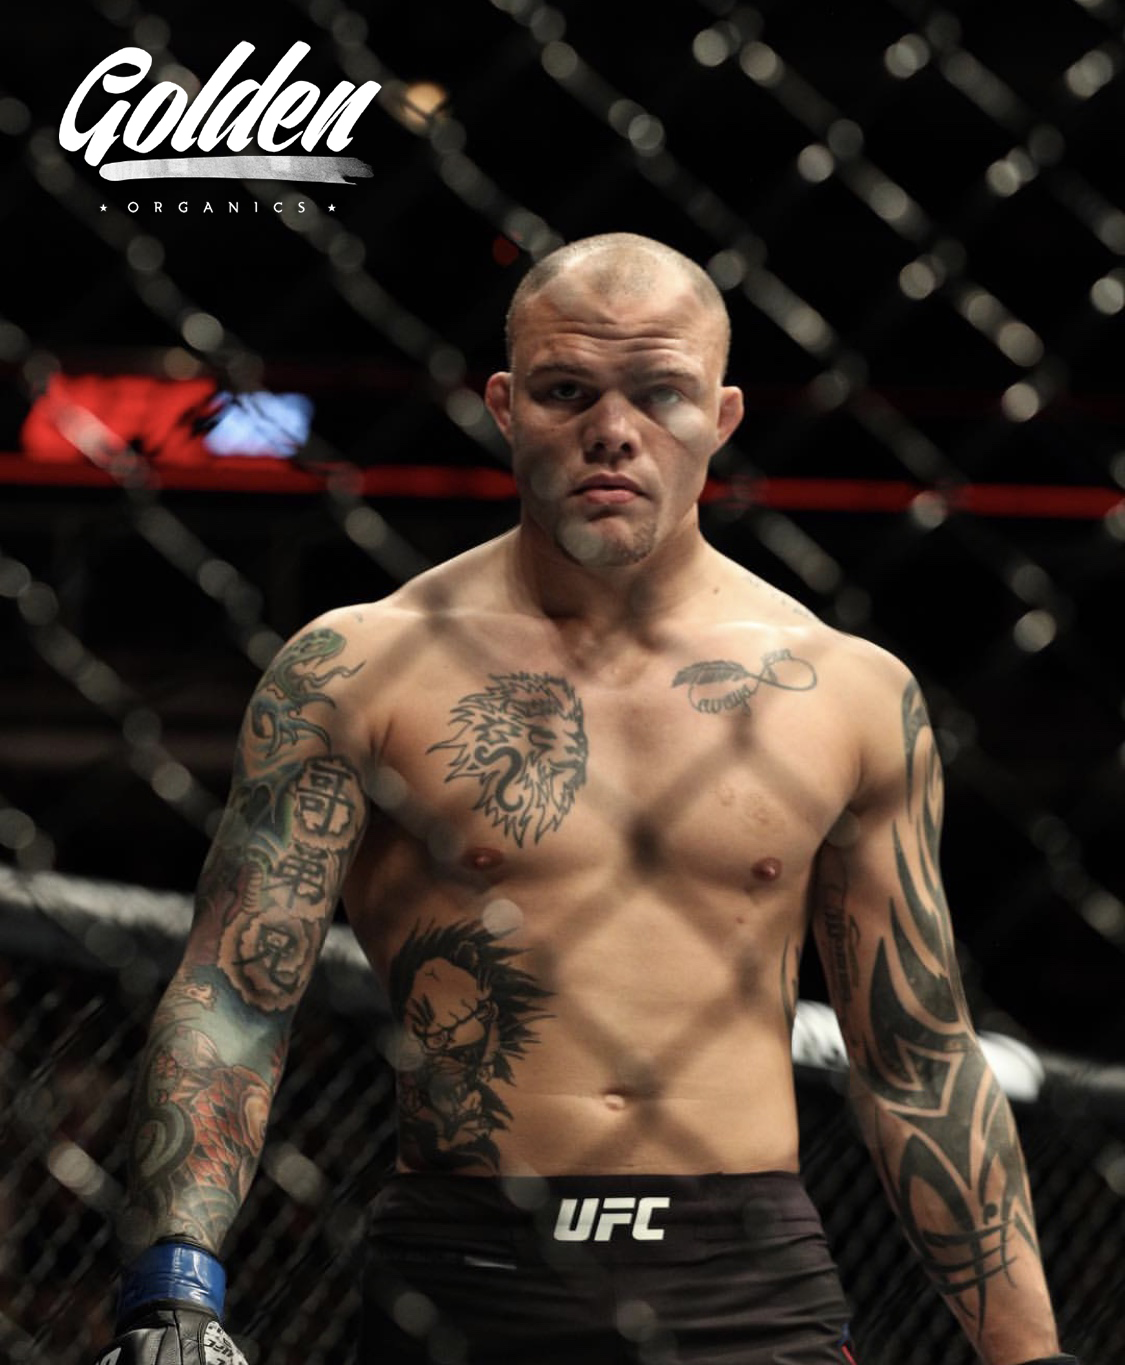 The UFC’s Anthony Smith latest MMA fighter to use Golden Organics Ahead of Las Vegas Title Fight